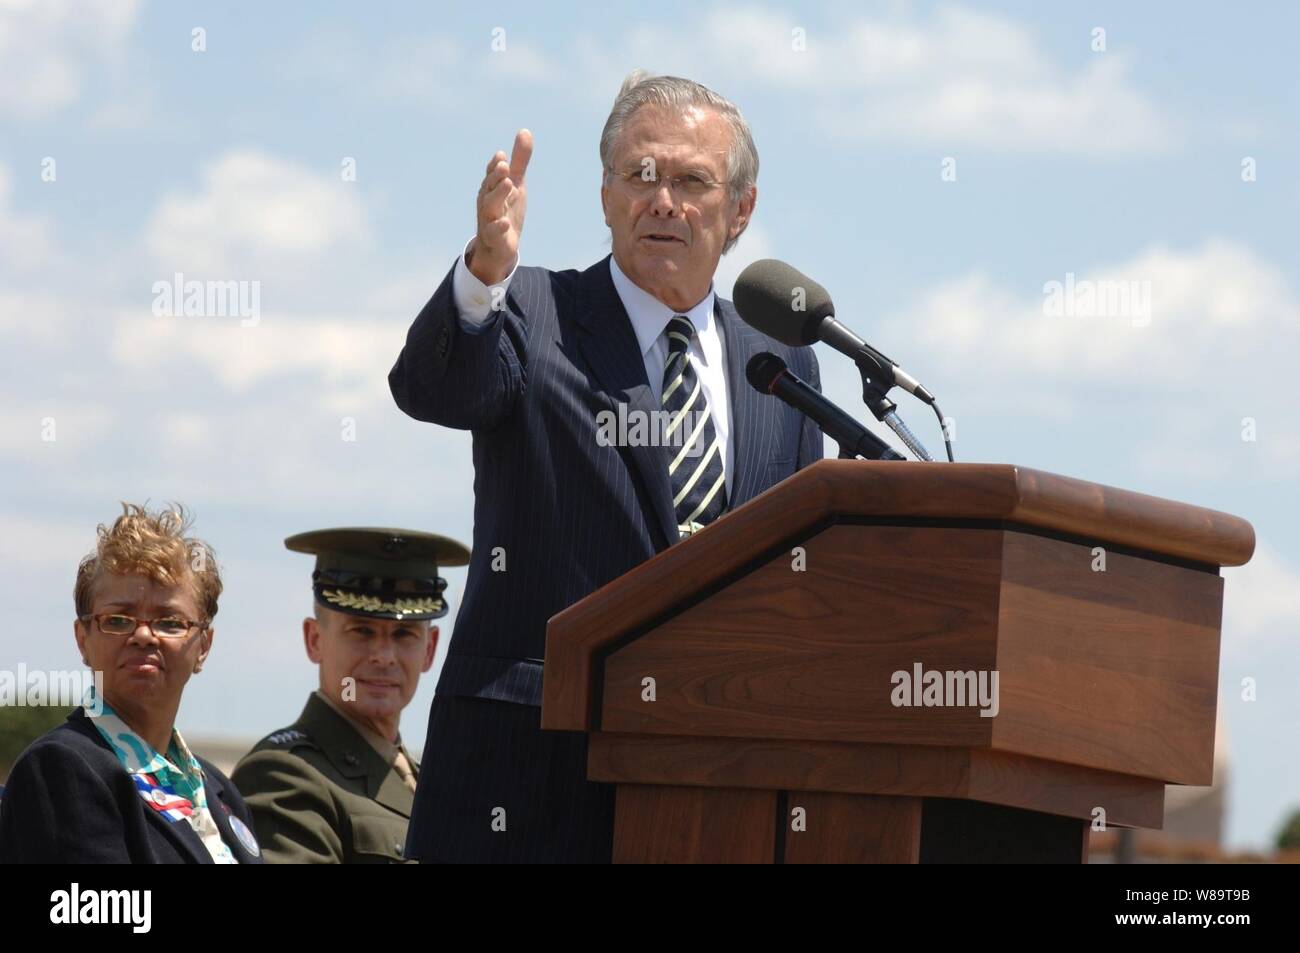 Secretary of Defense Donald H. Rumsfeld speaks to the audience during the ground-breaking ceremony to mark the beginning of work on the Pentagon Memorial at the site where 184 innocent lives were lost when terrorist hijacked American Airlines Flight 77 crashed on Sept. 11, 2001. The memorial will have cantilevered benches with reflecting pools underneath each one in memory of each victim of the attack. Fifty-nine memorial units face one direction, 125 face the other distinguishing victims on board the plane from those who lost their lives inside the Pentagon. In addition 80 Paperbark maple tre Stock Photo